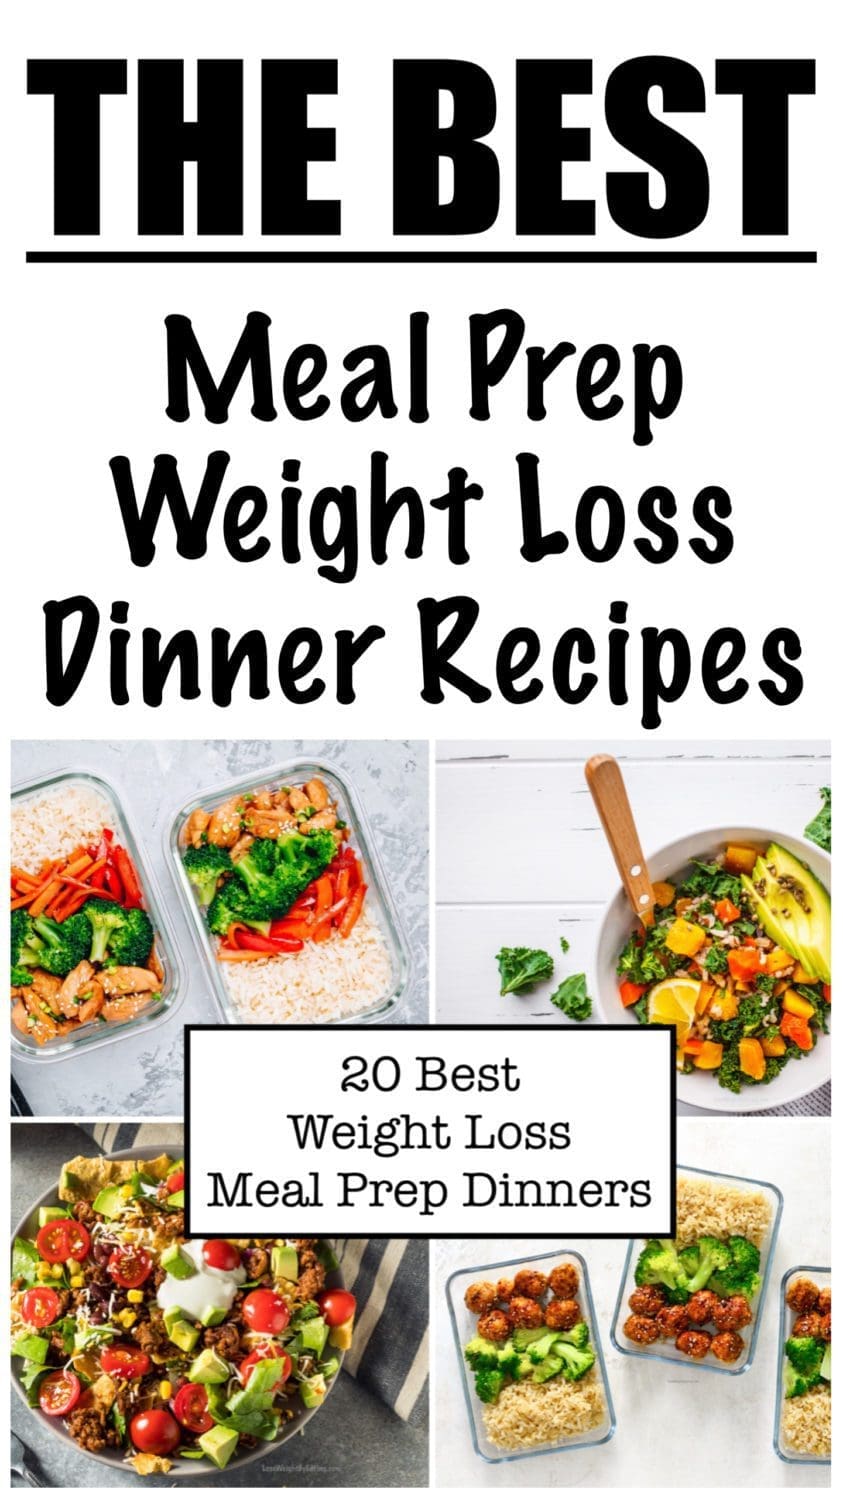 weight loss meal prep dinners